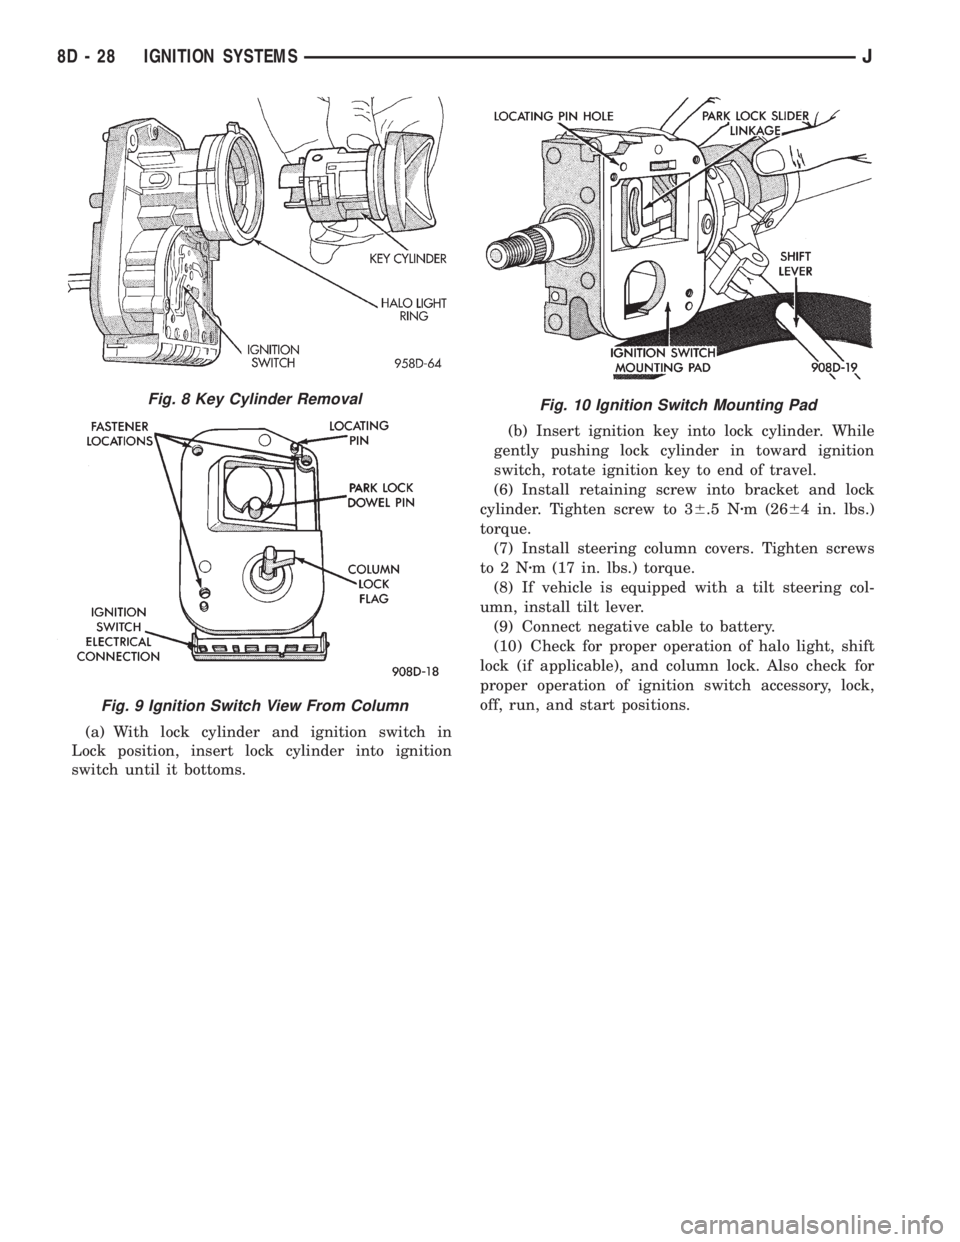 JEEP YJ 1995  Service And Repair Manual (a) With lock cylinder and ignition switch in
Lock position, insert lock cylinder into ignition
switch until it bottoms.(b) Insert ignition key into lock cylinder. While
gently pushing lock cylinder i